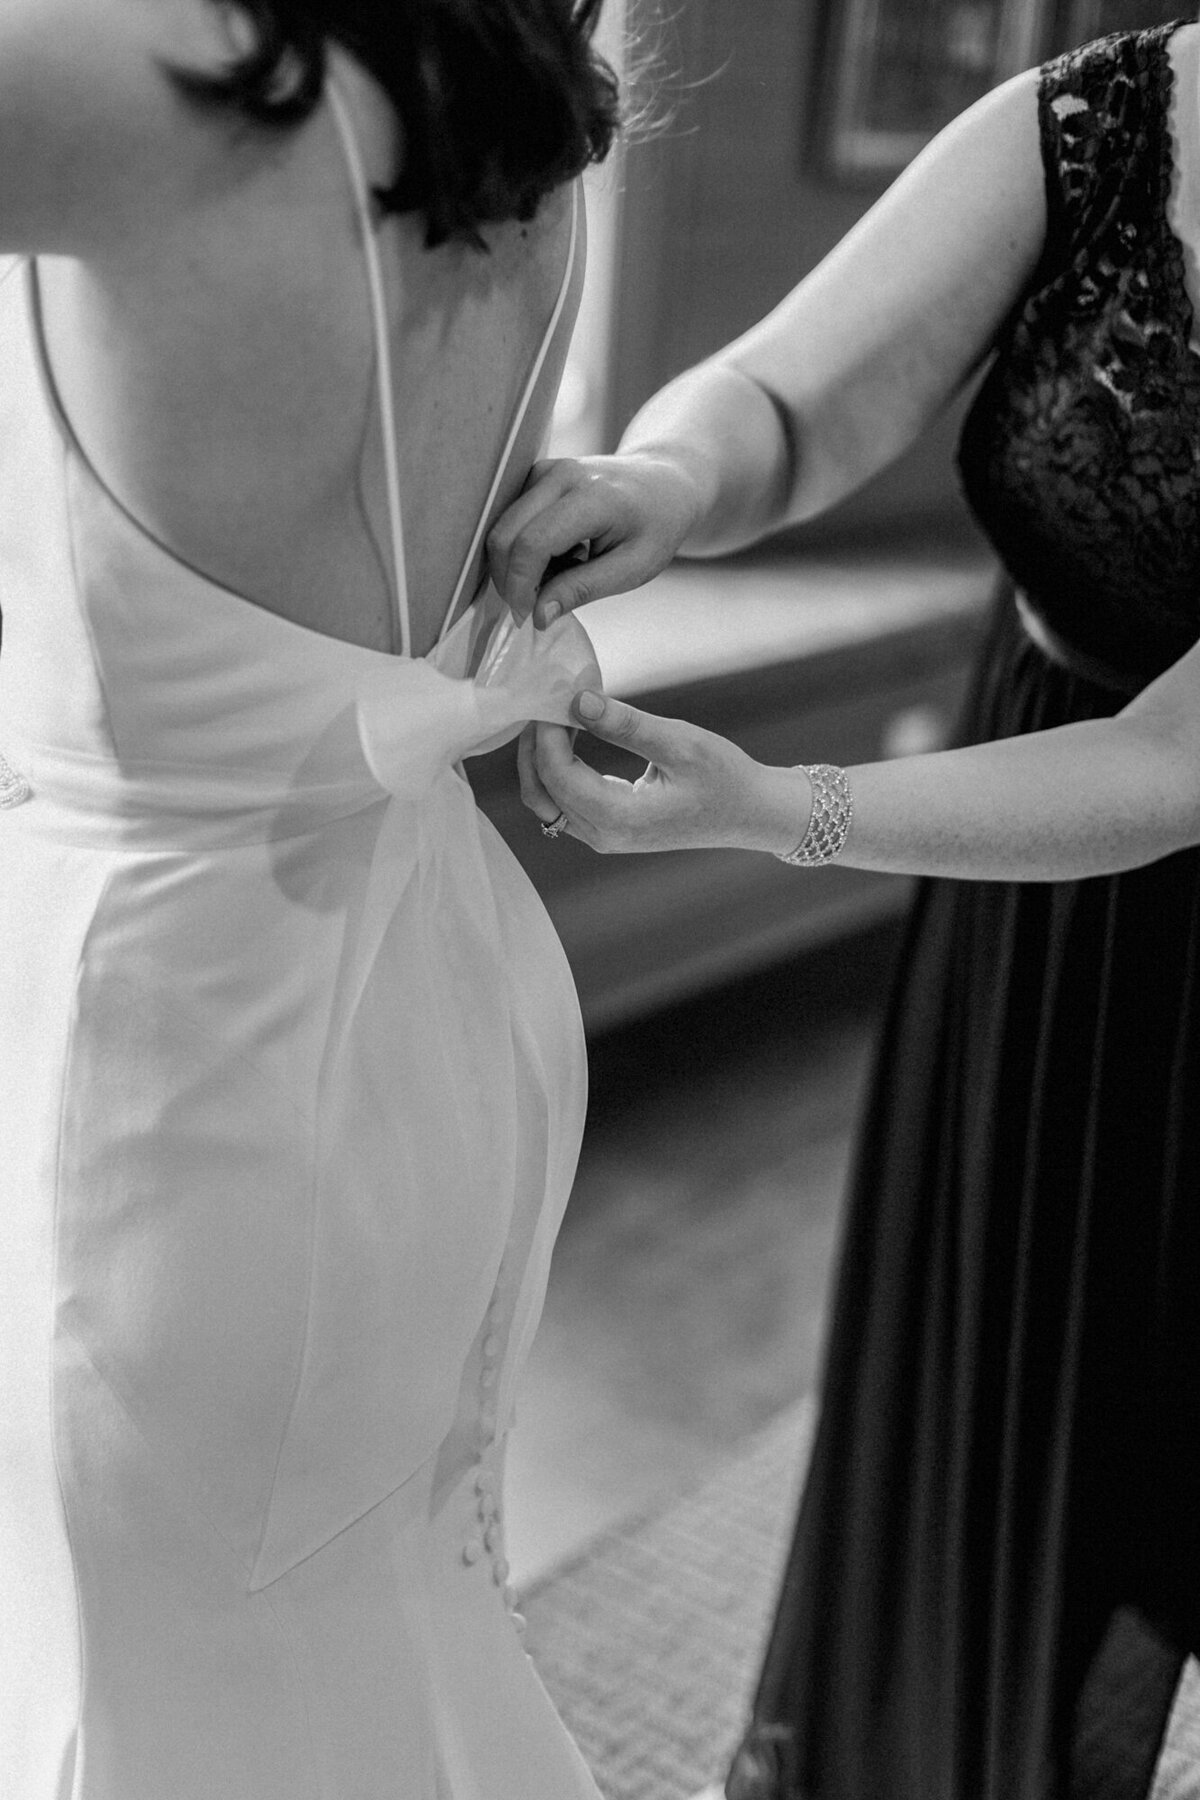 A detail shot of a bow on the back of a bride's wedding dress